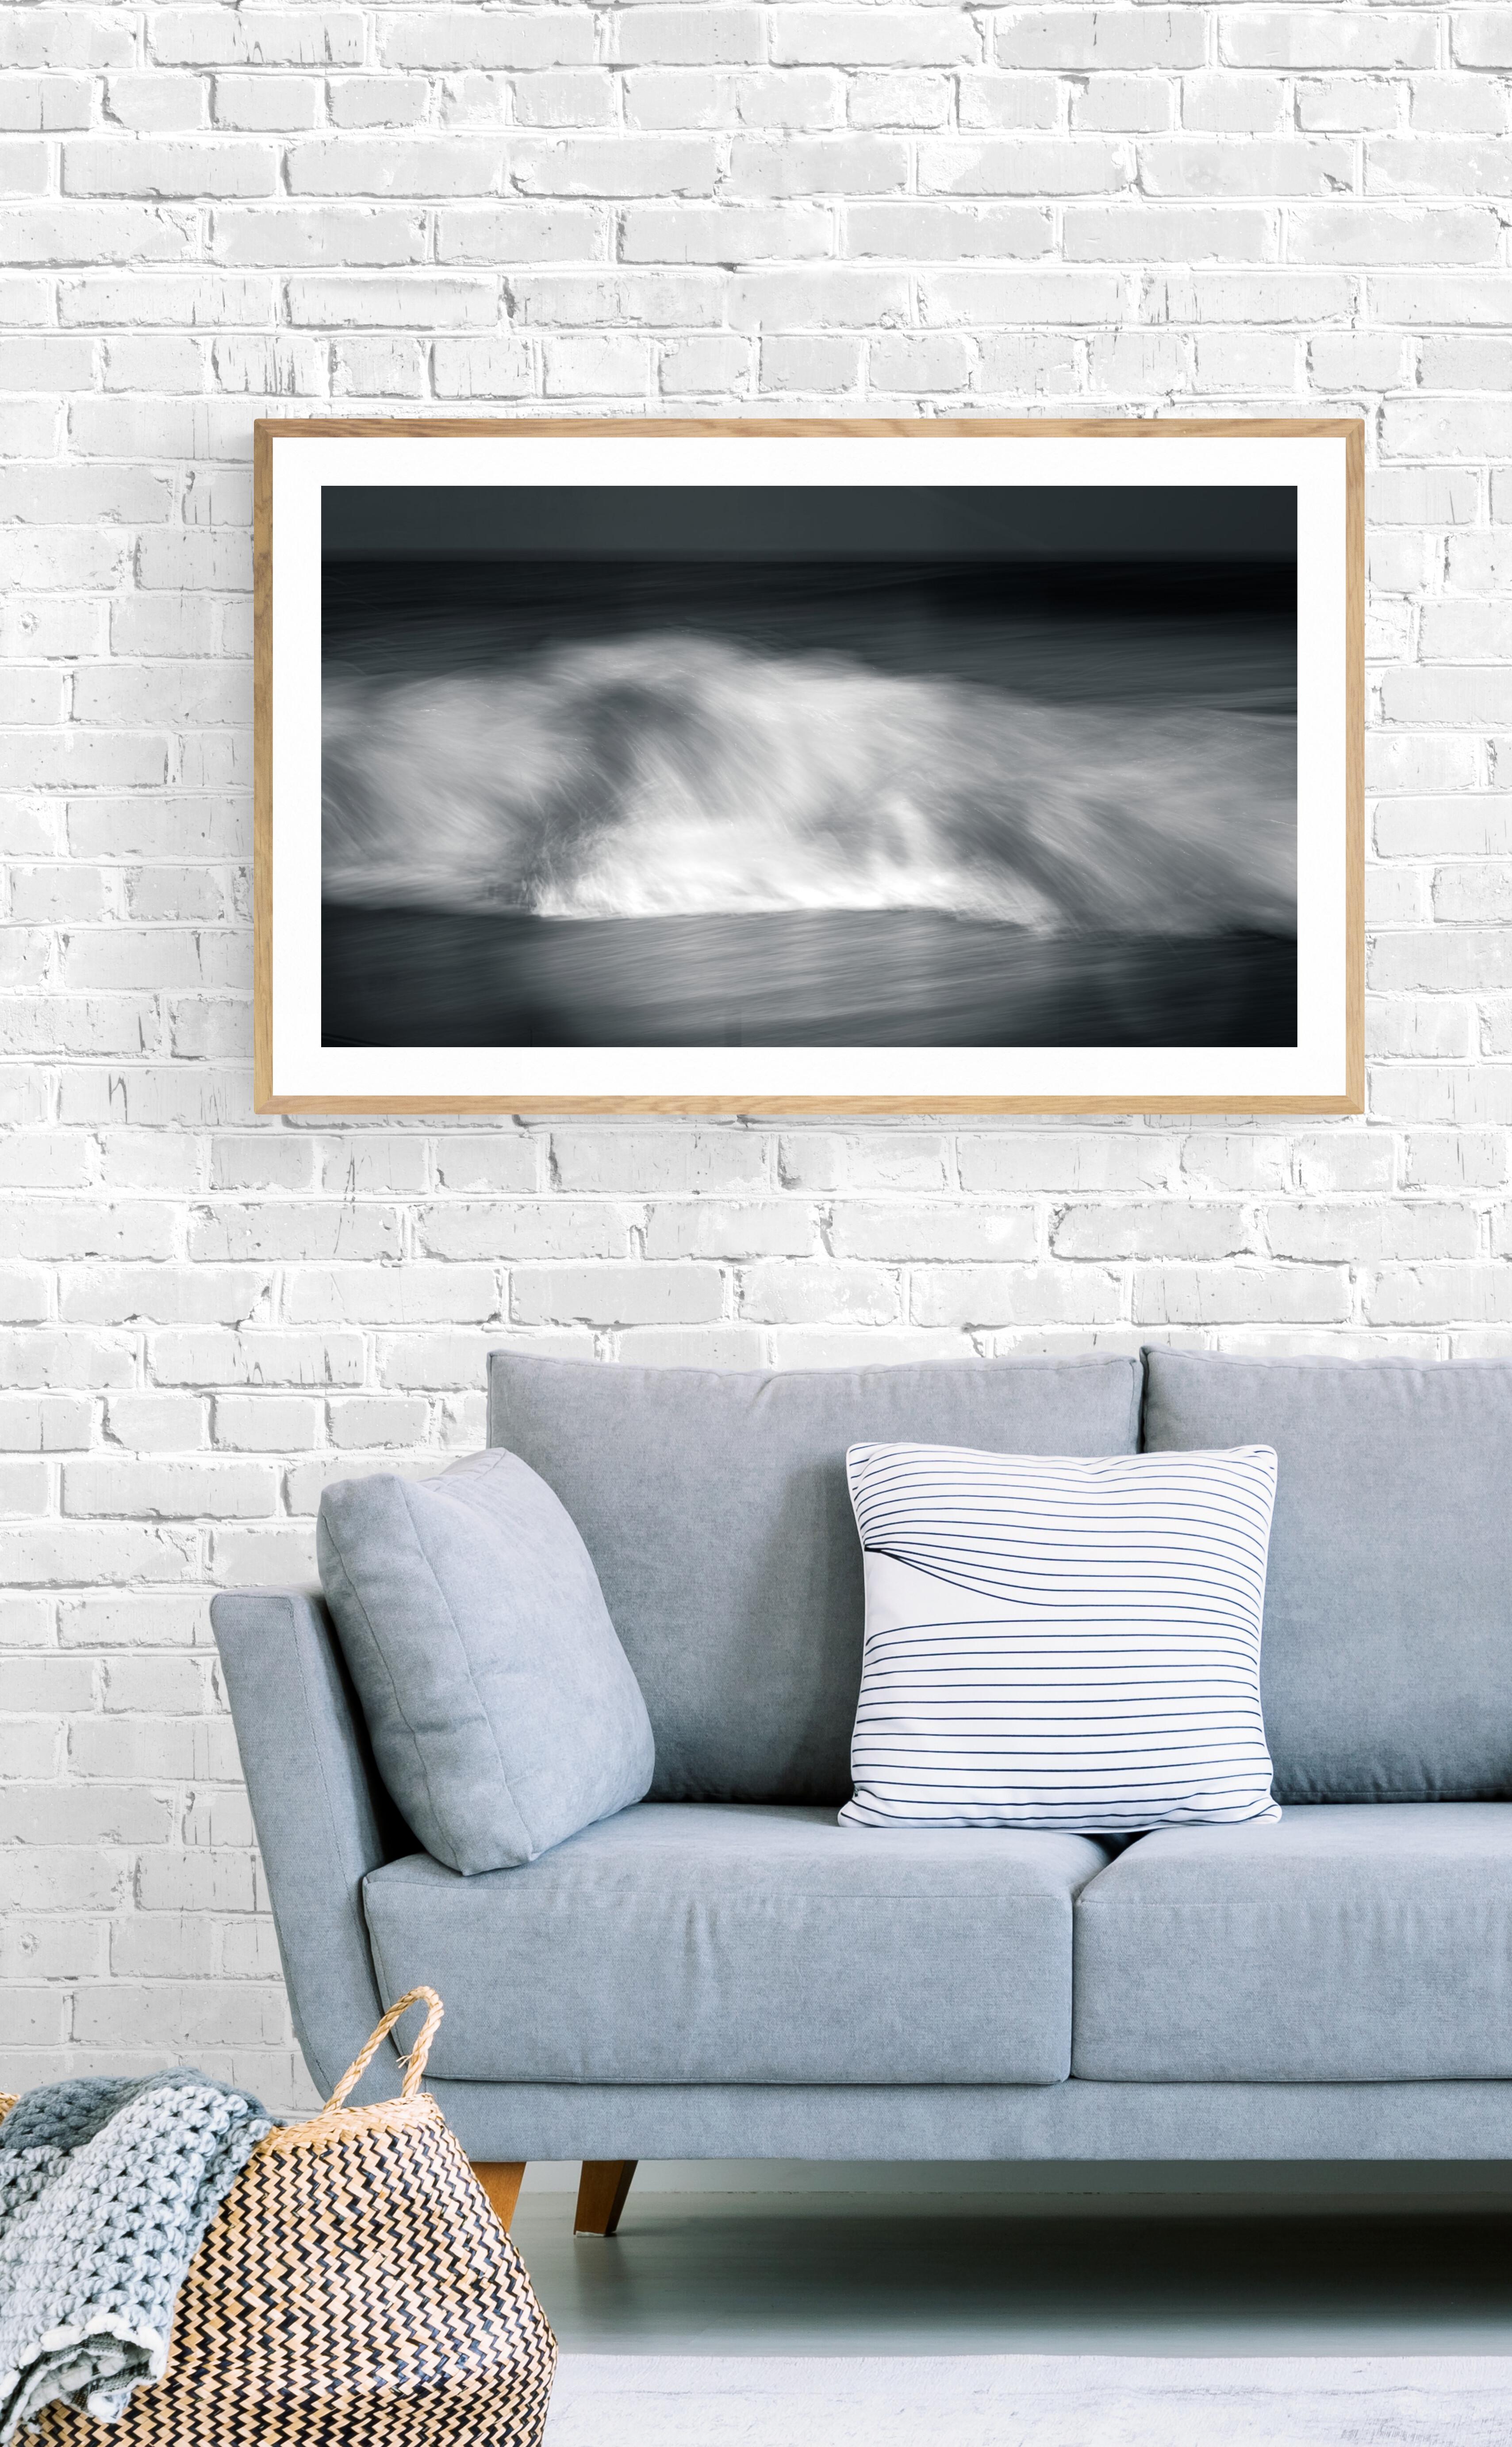 Limited Edition 1 / 7 Black and White Photograph Seascape - Kinetic #37 For Sale 2